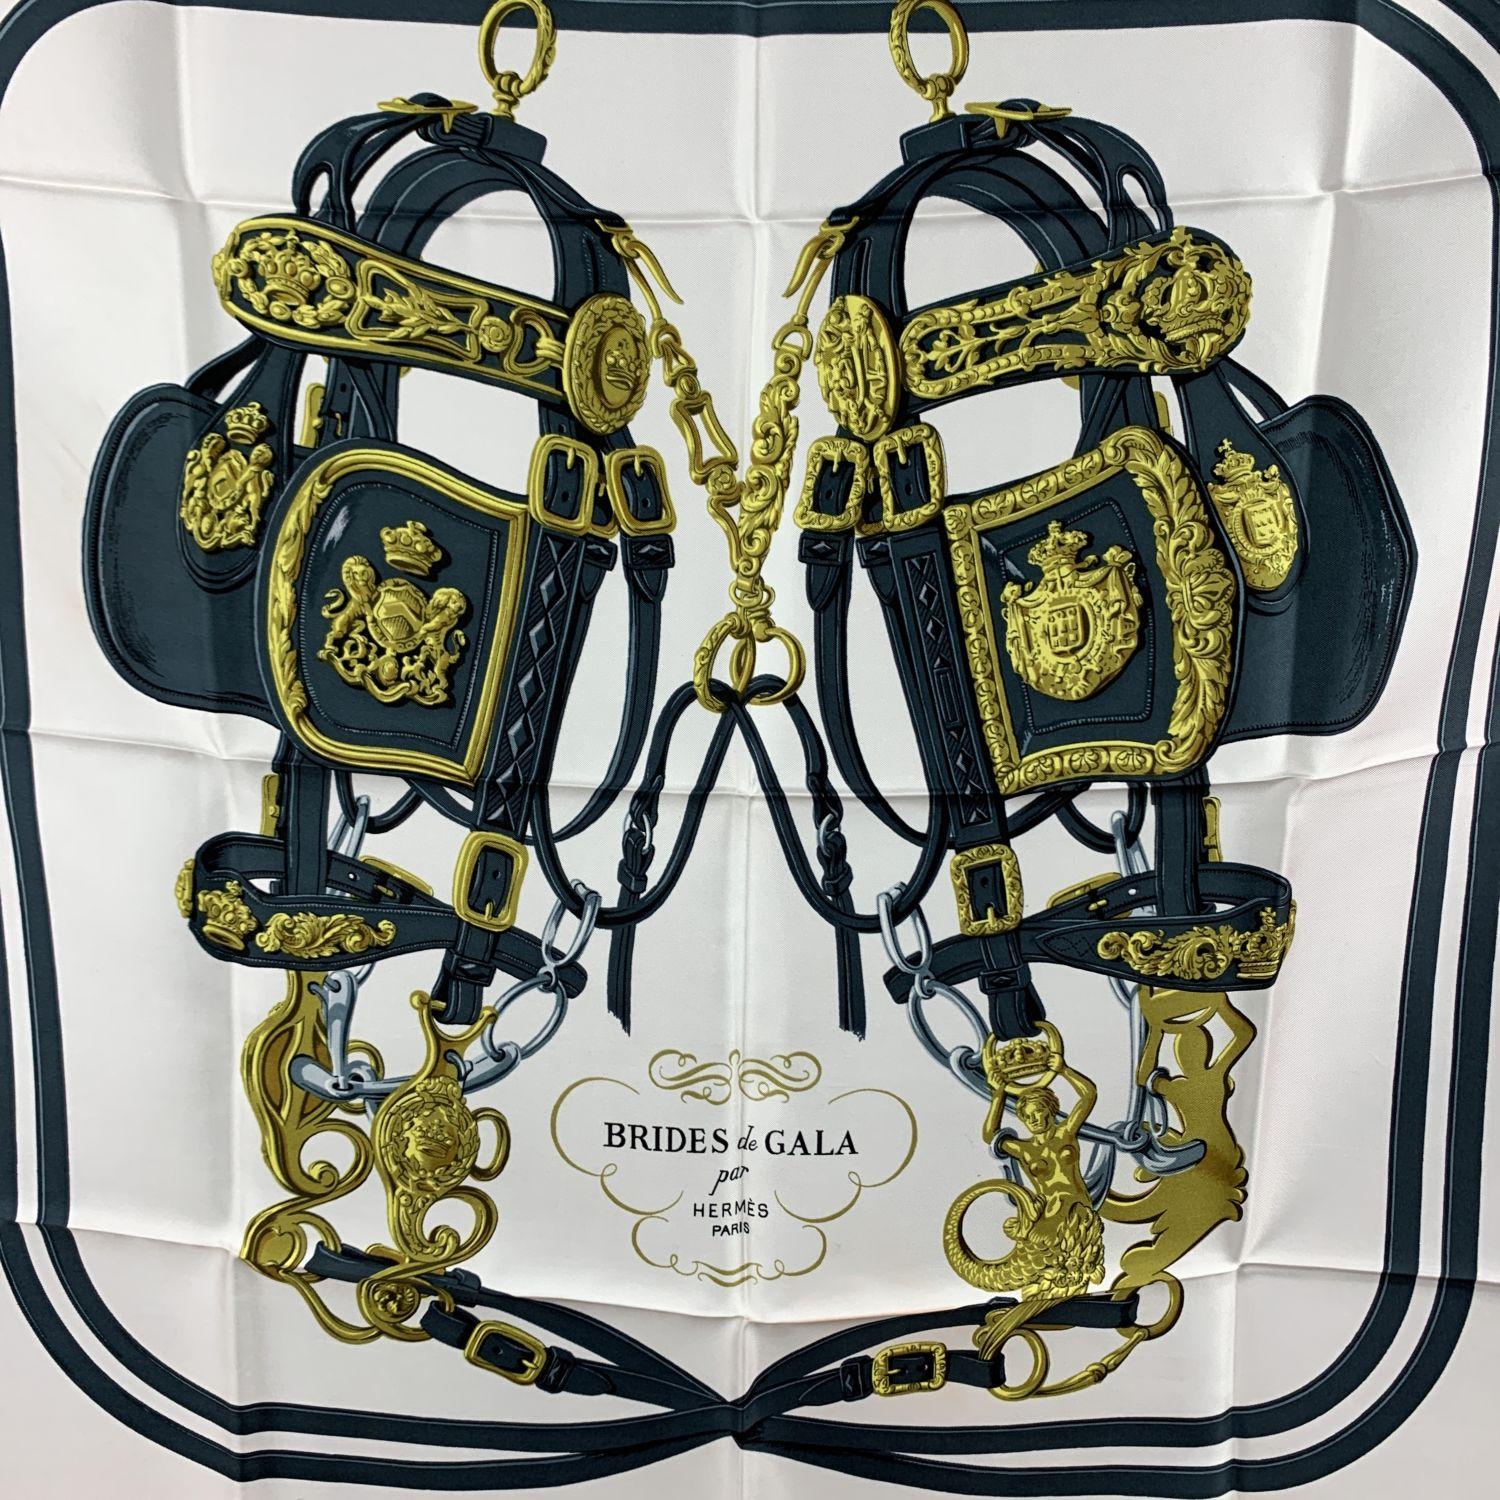 HERMES scarf 'Brides de Gala' by Hugo Grygkar and originally issued in 1957. It is a truly classics of Hermes maison and it is issued constantly. This design depicts two bridles decorated with the emblazoned fastenings that adorned horse-drawn